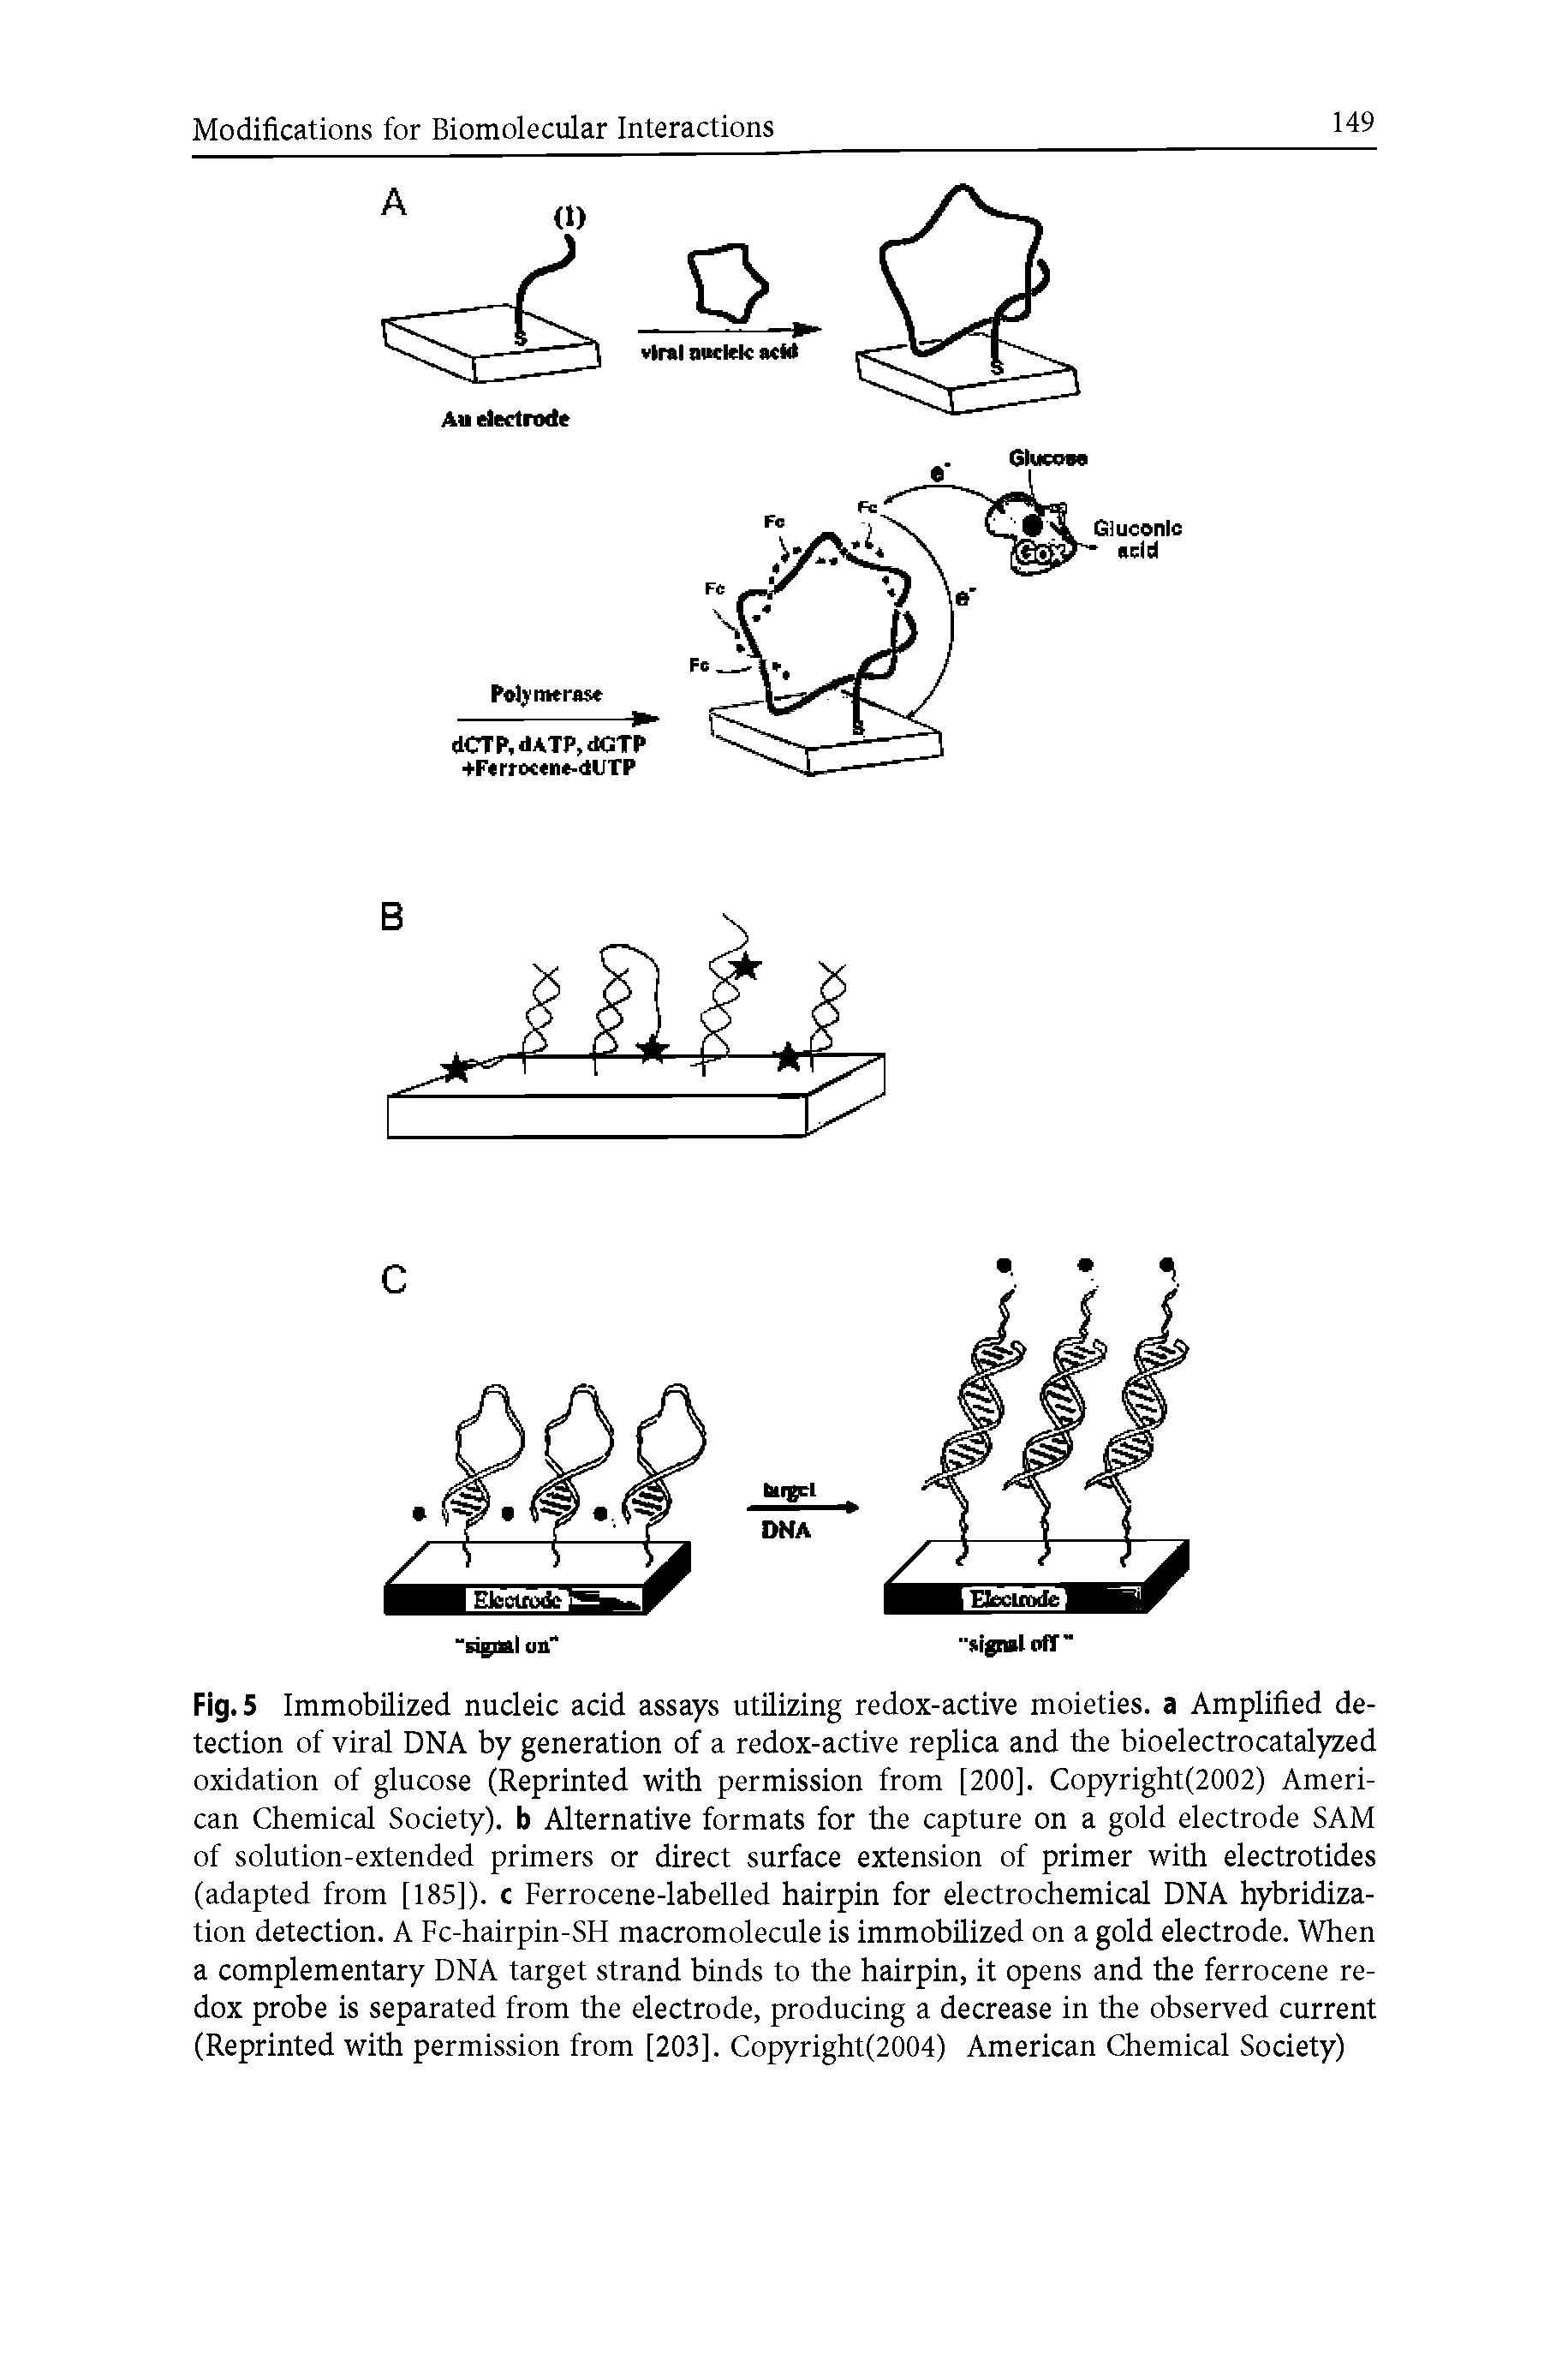 Fig. 5 Immobilized nucleic acid assays utilizing redox-active moieties, a Amplified detection of viral DNA by generation of a redox-active replica and the bioelectrocatalyzed oxidation of glucose (Reprinted with permission from [200]. Copyright(2002) American Chemical Society), b Alternative formats for the capture on a gold electrode SAM of solution-extended primers or direct surface extension of primer with electrotides (adapted from [185]). c Ferrocene-labelled hairpin for electrochemical DNA hybridization detection. A Fc-hairpin-SH macromolecule is immobilized on a gold electrode. When a complementary DNA target strand binds to the hairpin, it opens and the ferrocene redox probe is separated from the electrode, producing a decrease in the observed current (Reprinted with permission from [203], Copyright(2004) American Chemical Society)...